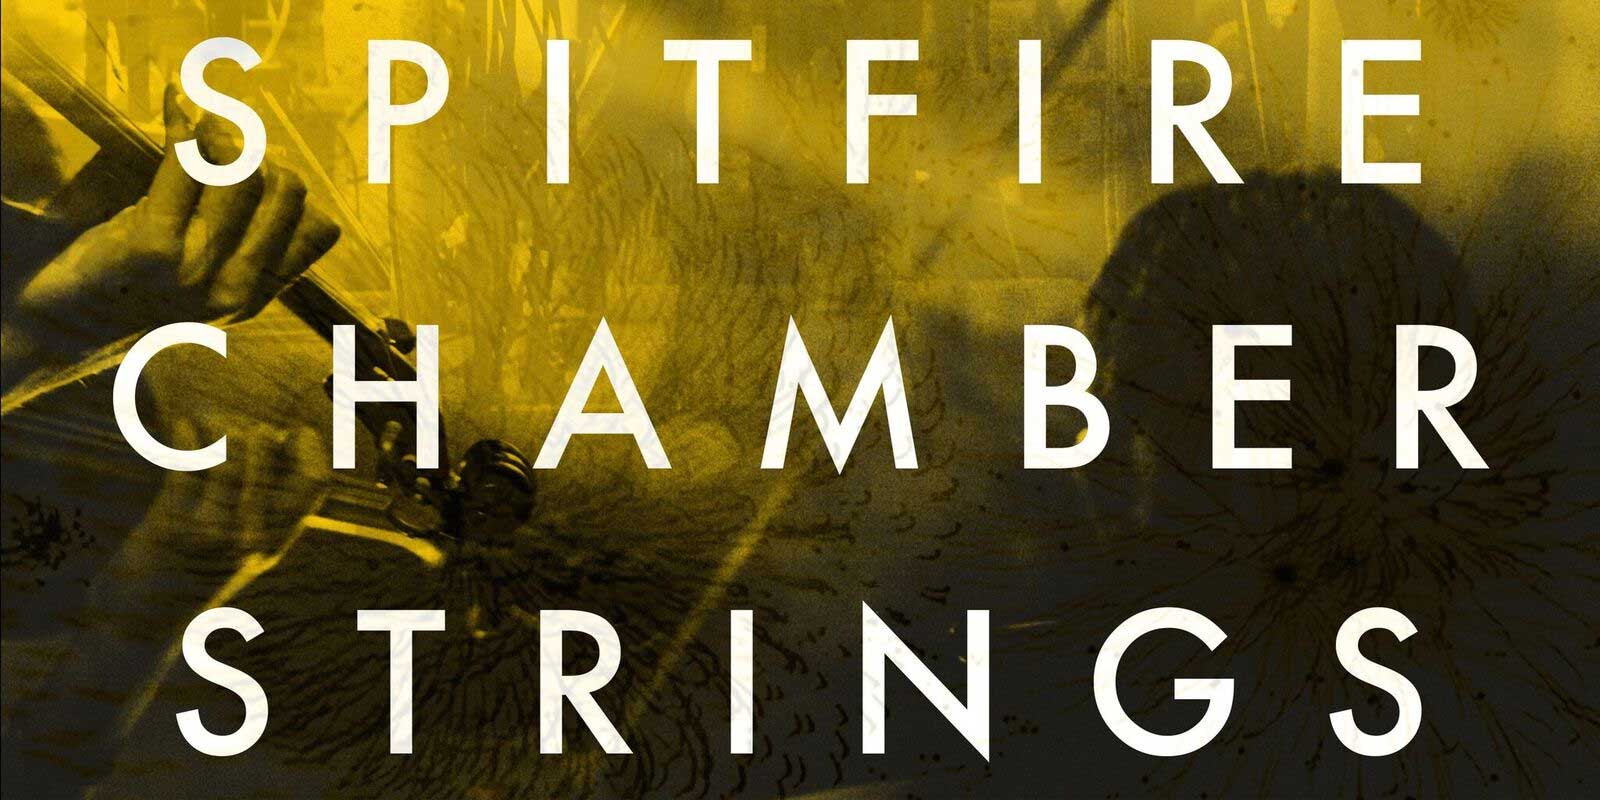 Chamber stings spitfire audio